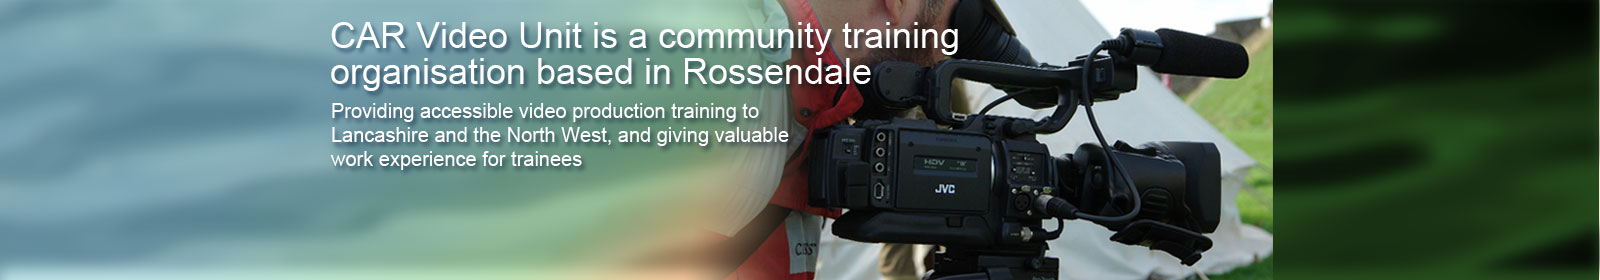 CAR Video Unit is a community training organisation based in Rossendale, Providing accessible video production training to Lancashire and the North West, and giving valuable work experience for trainees